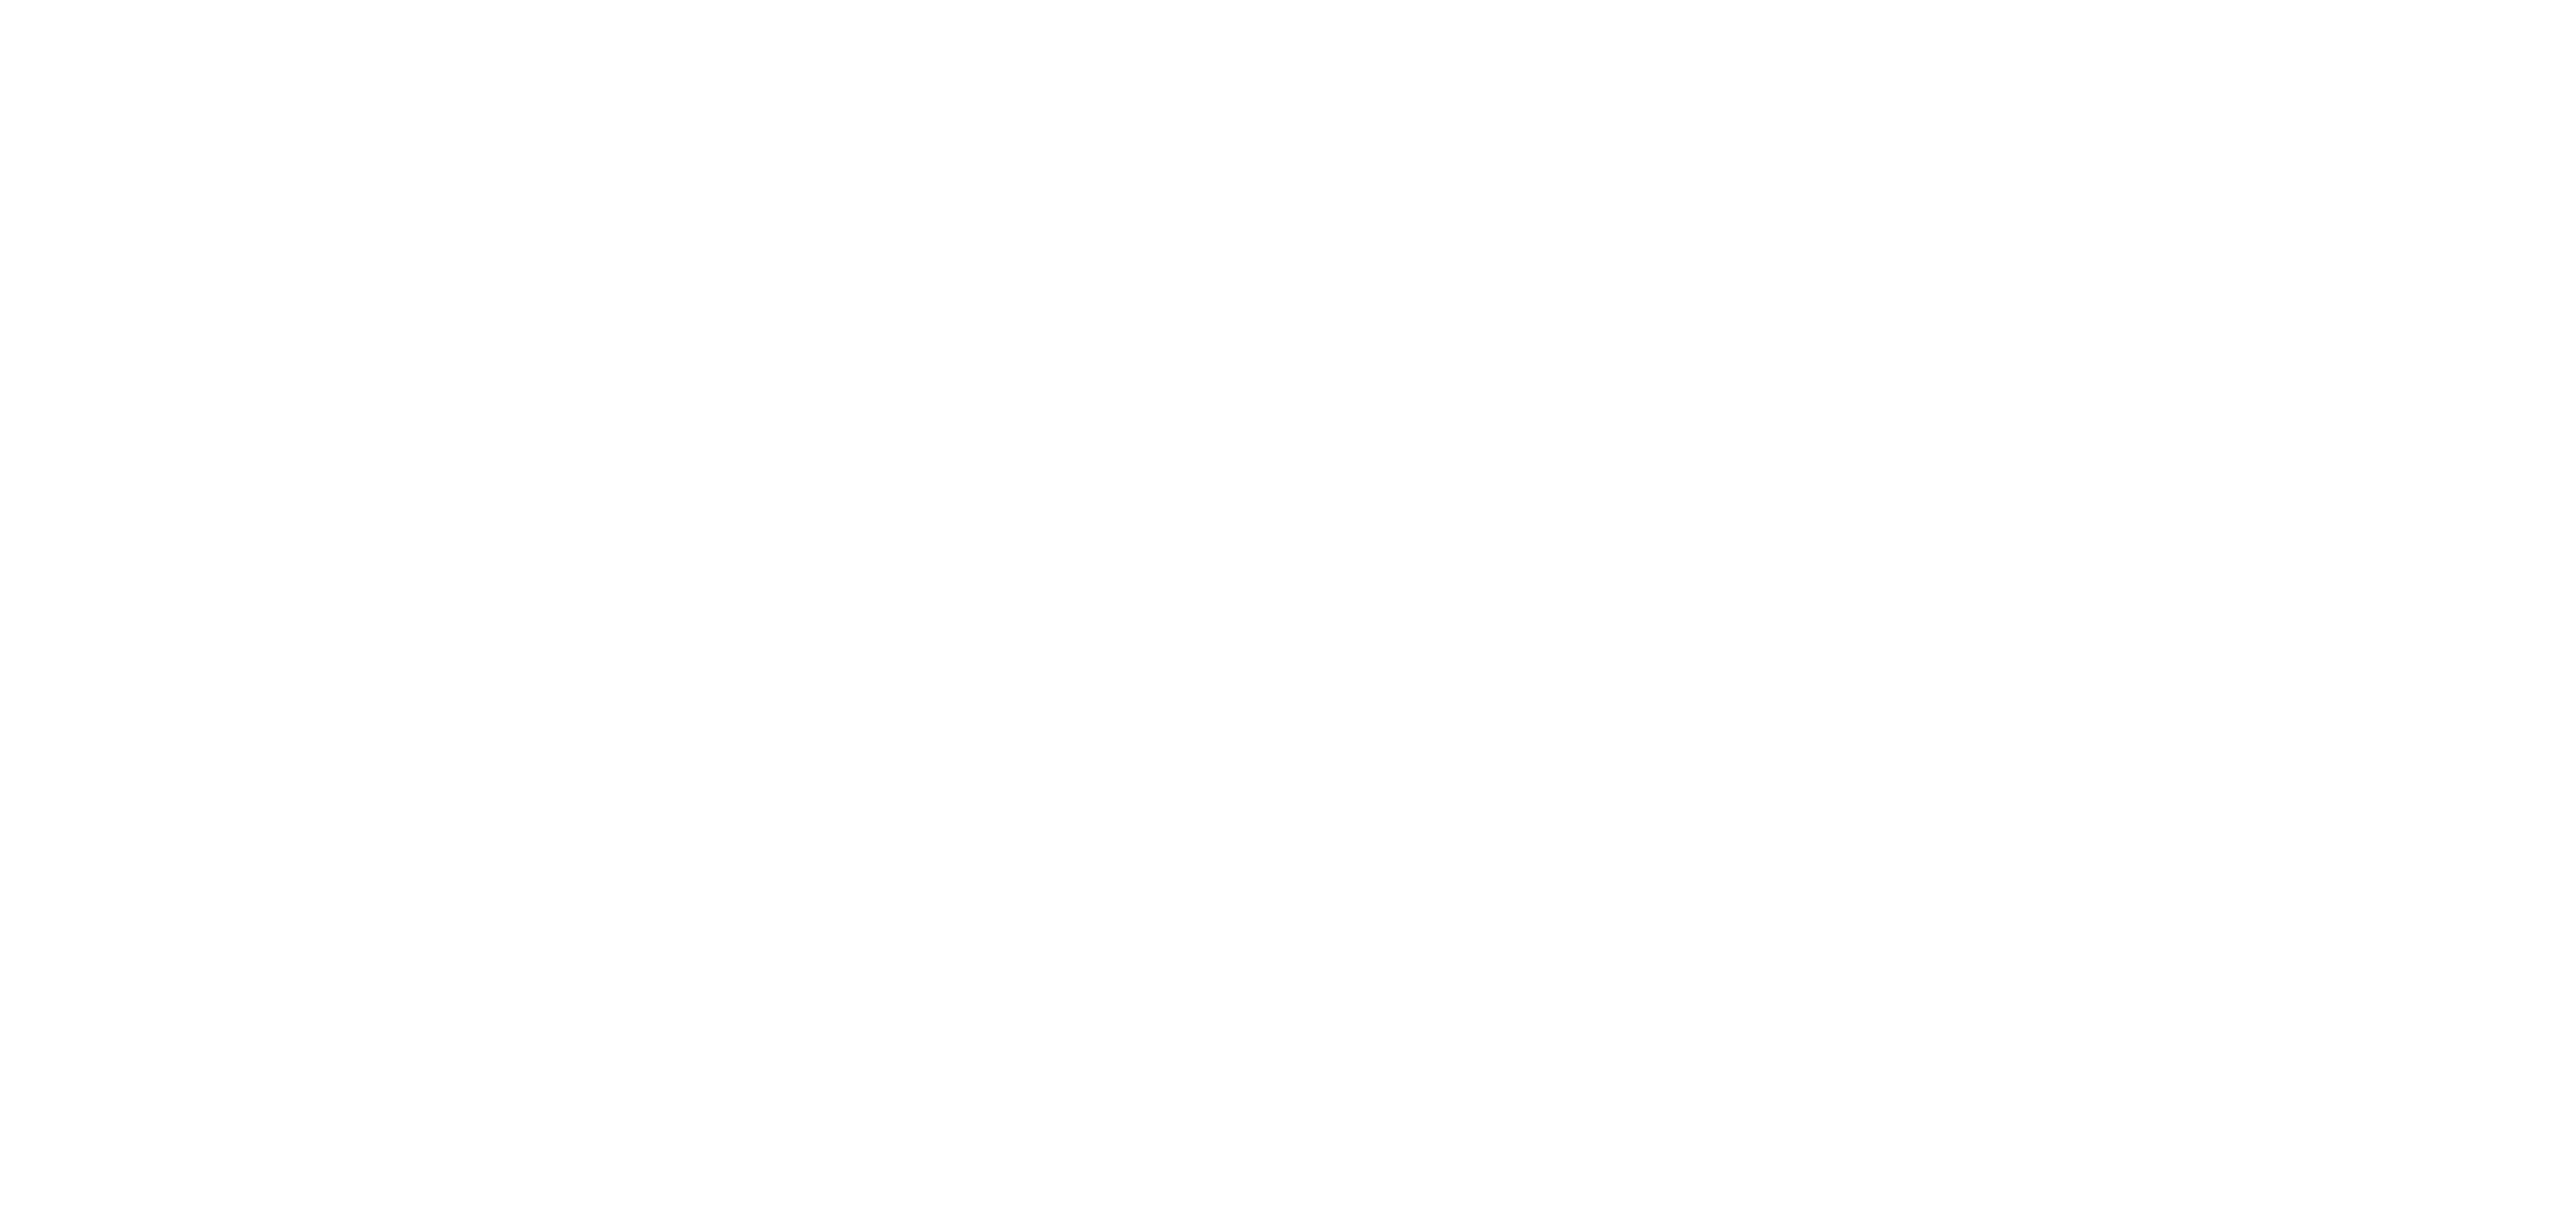 Cabinetry Logo - Home